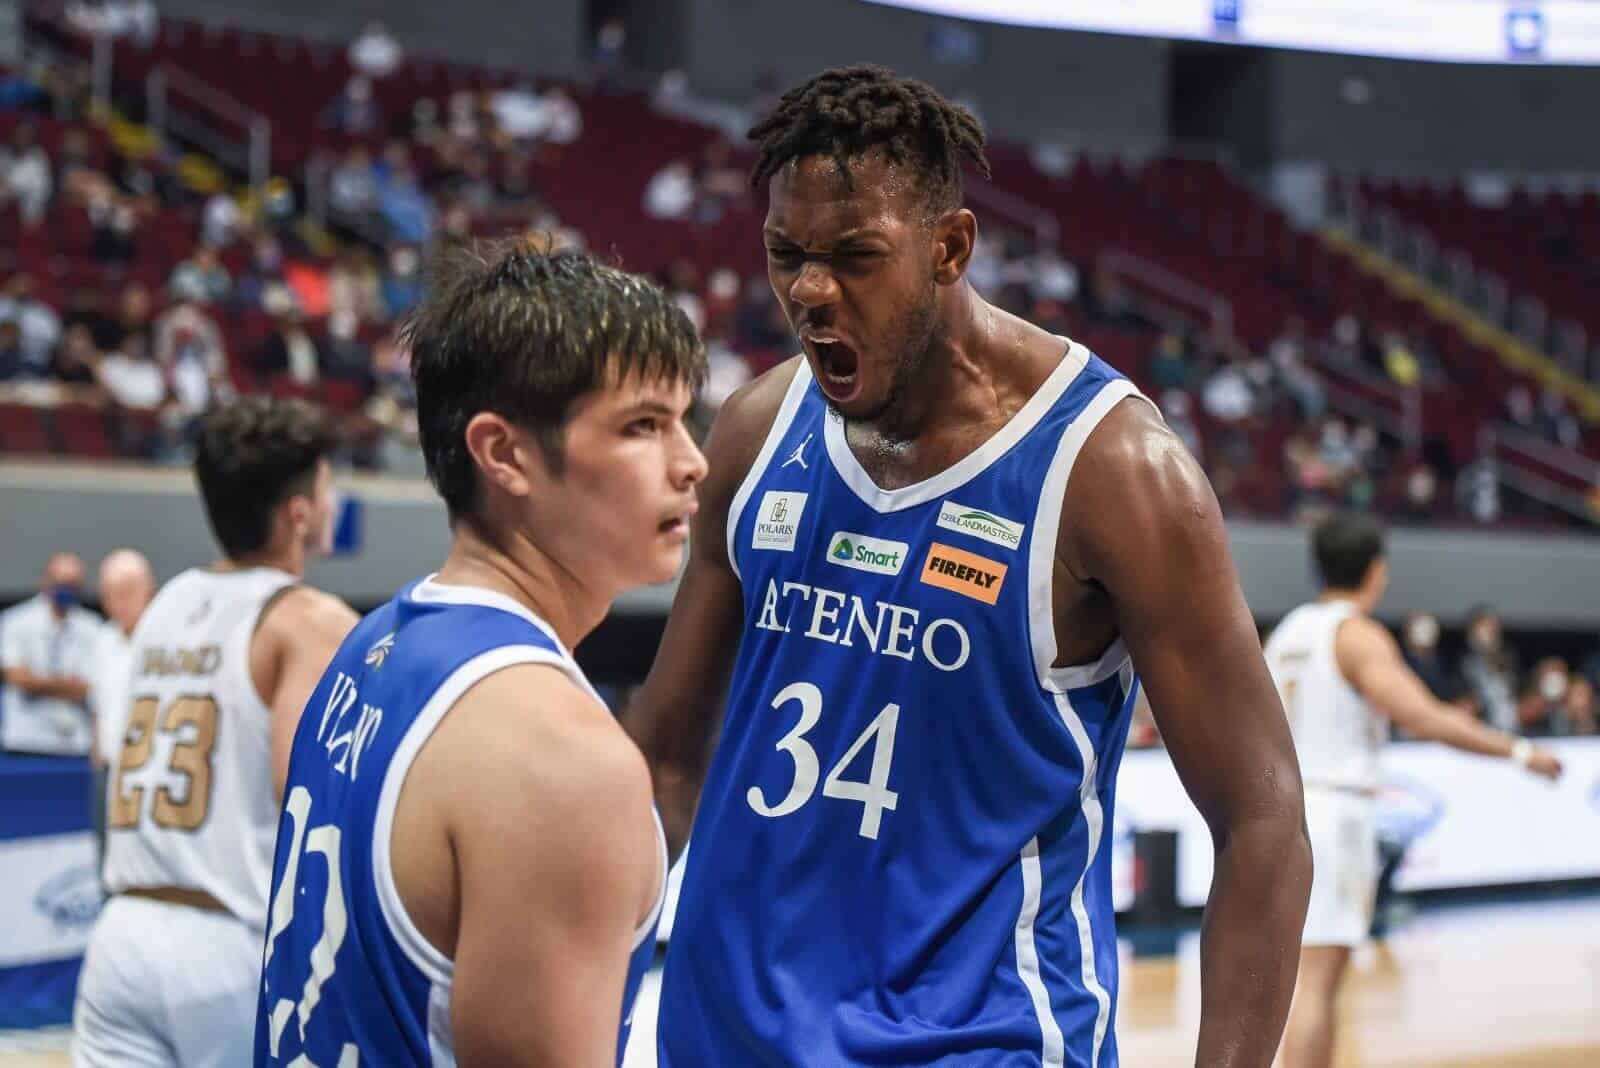 A basketball player converses with a teammate during a gritty win for Ateneo Blue Eagles against NU Bulldogs.